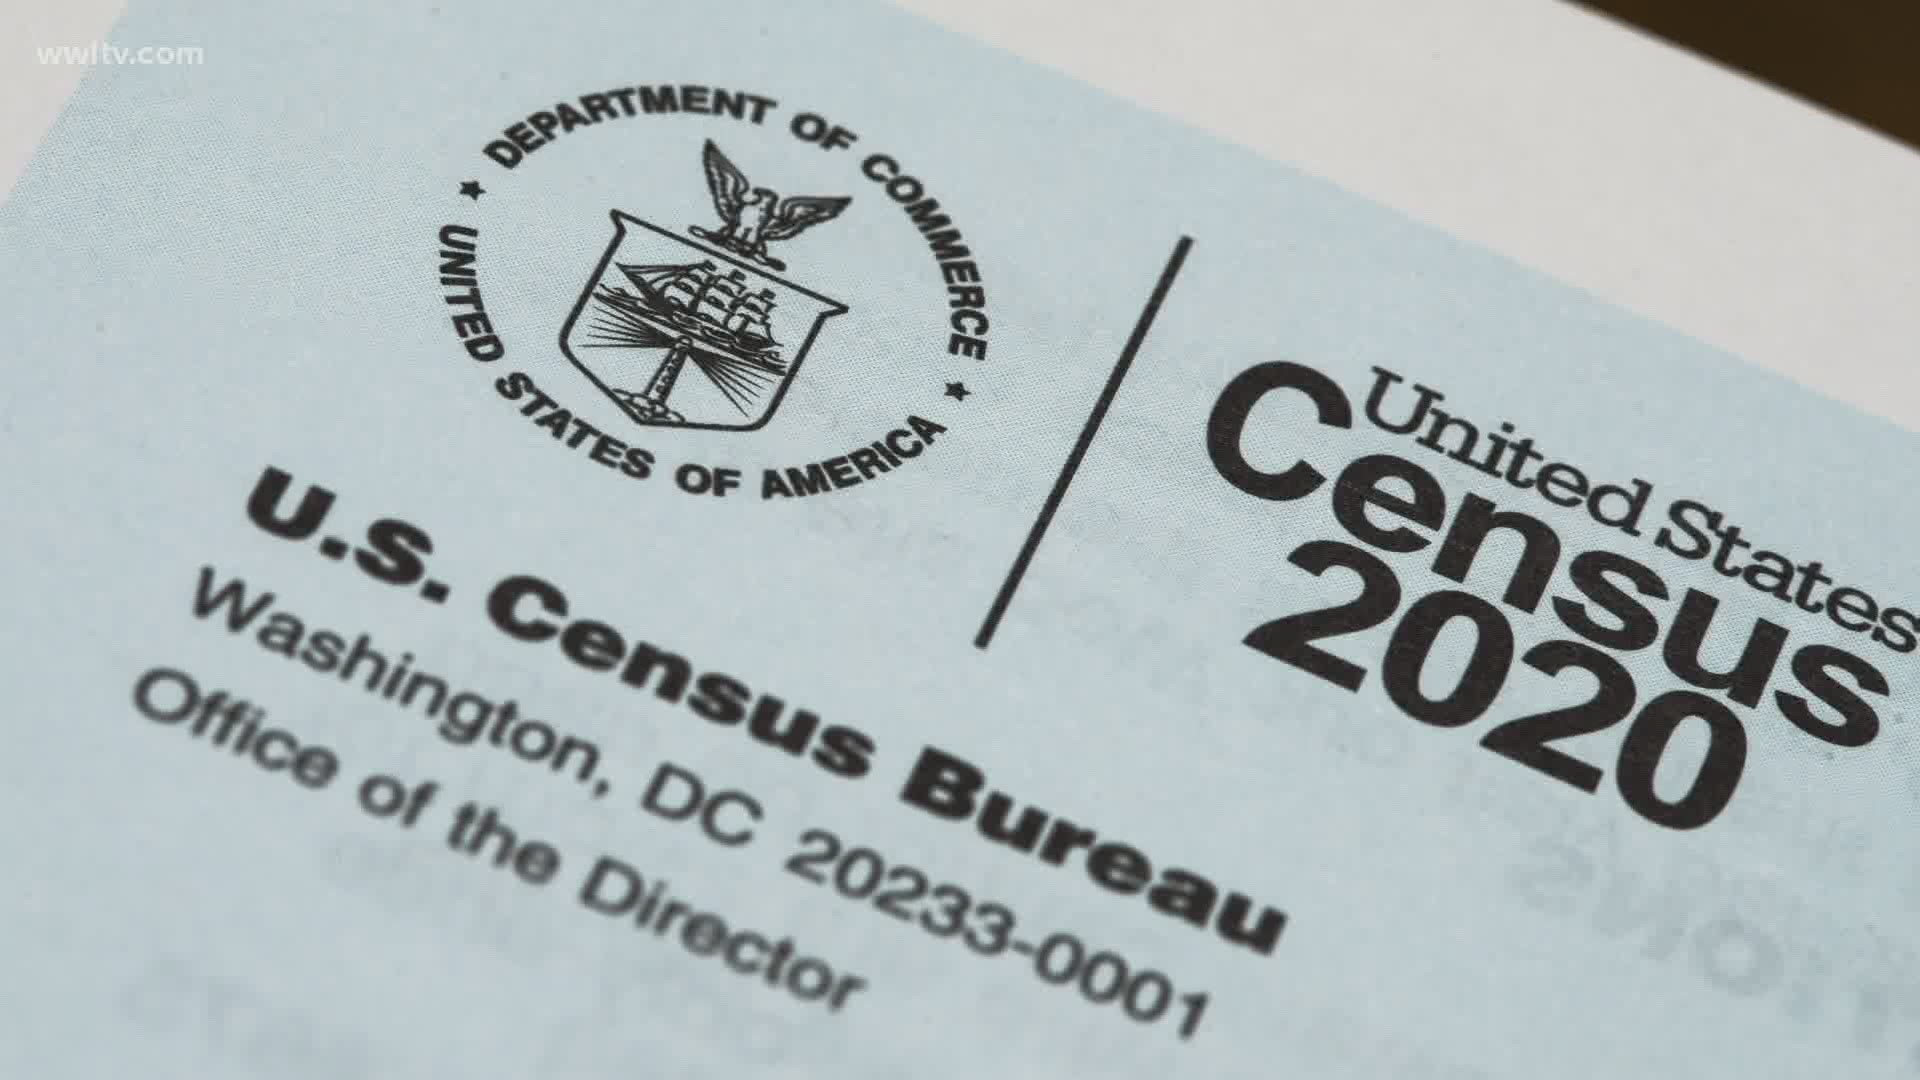 Michael Cook Sr., Chief of Public Information at the U.S. Census Bureau (a part of the Dept. of Commerce), explains what you need to know about the 2020 Census.